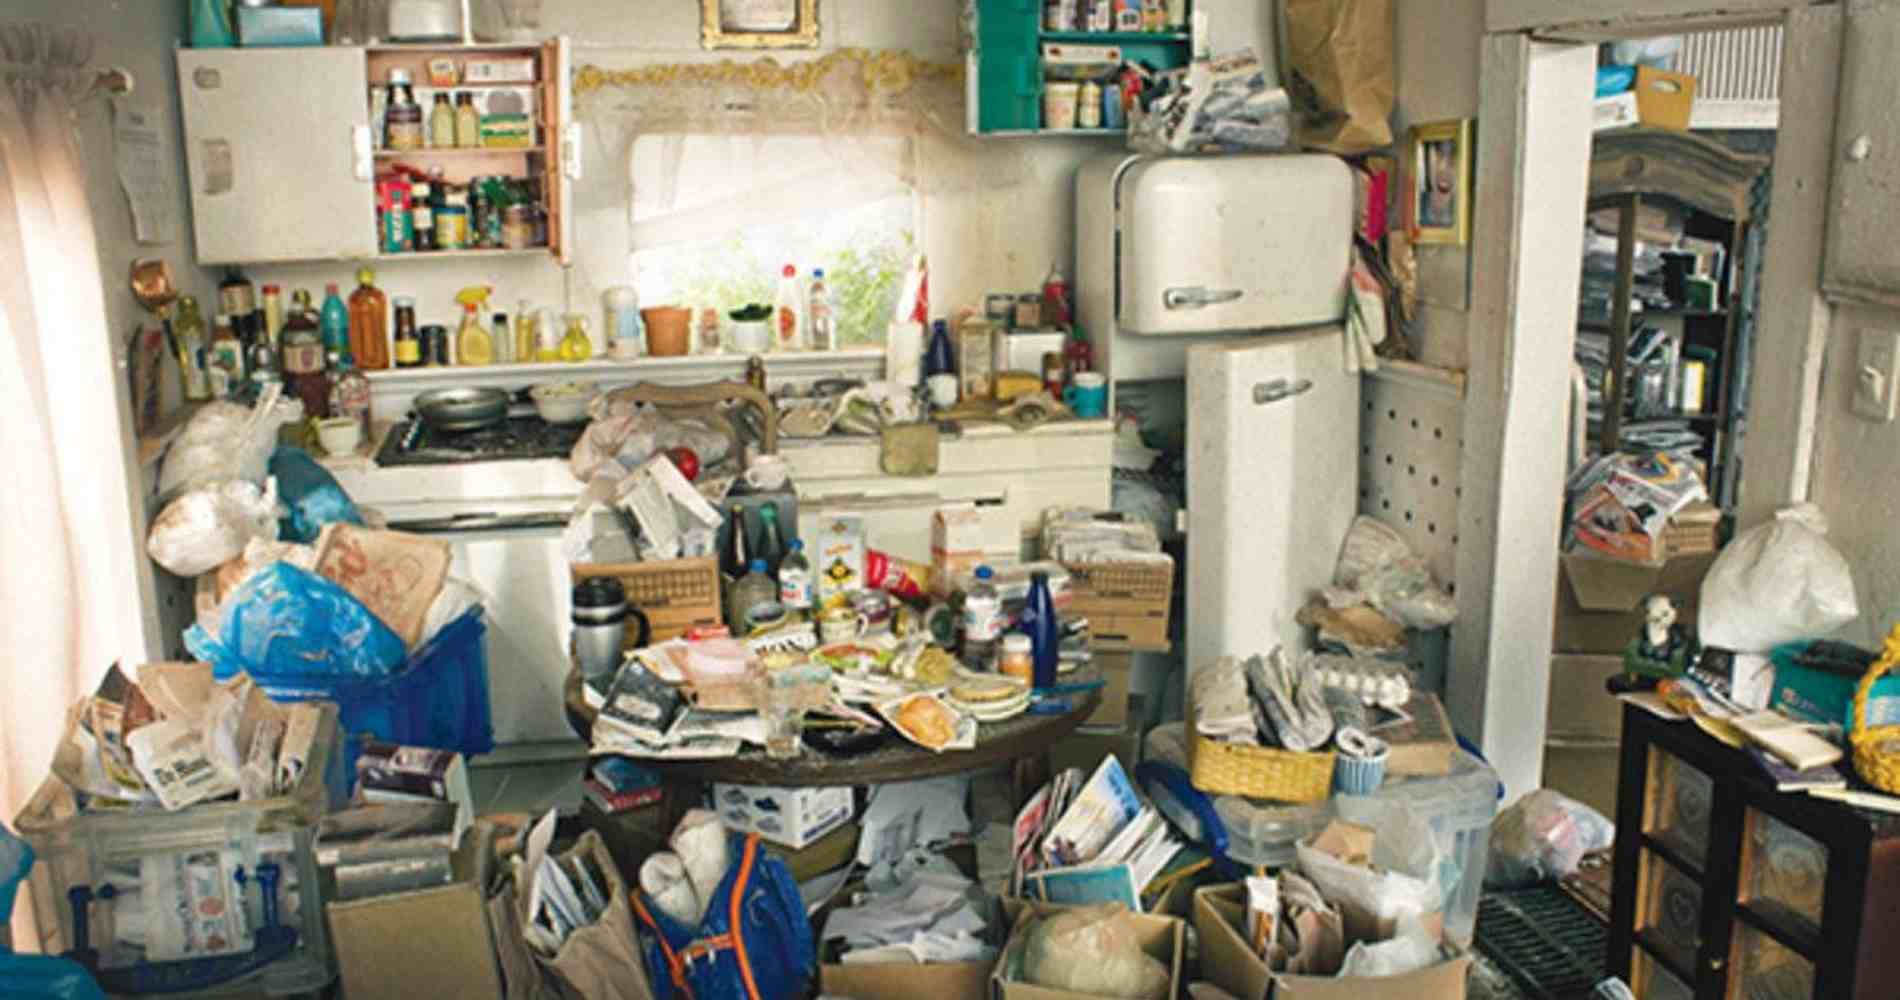 #1 for Hoarding Cleanup in Chandler, AZ with Over 1200 5-Star Reviews!